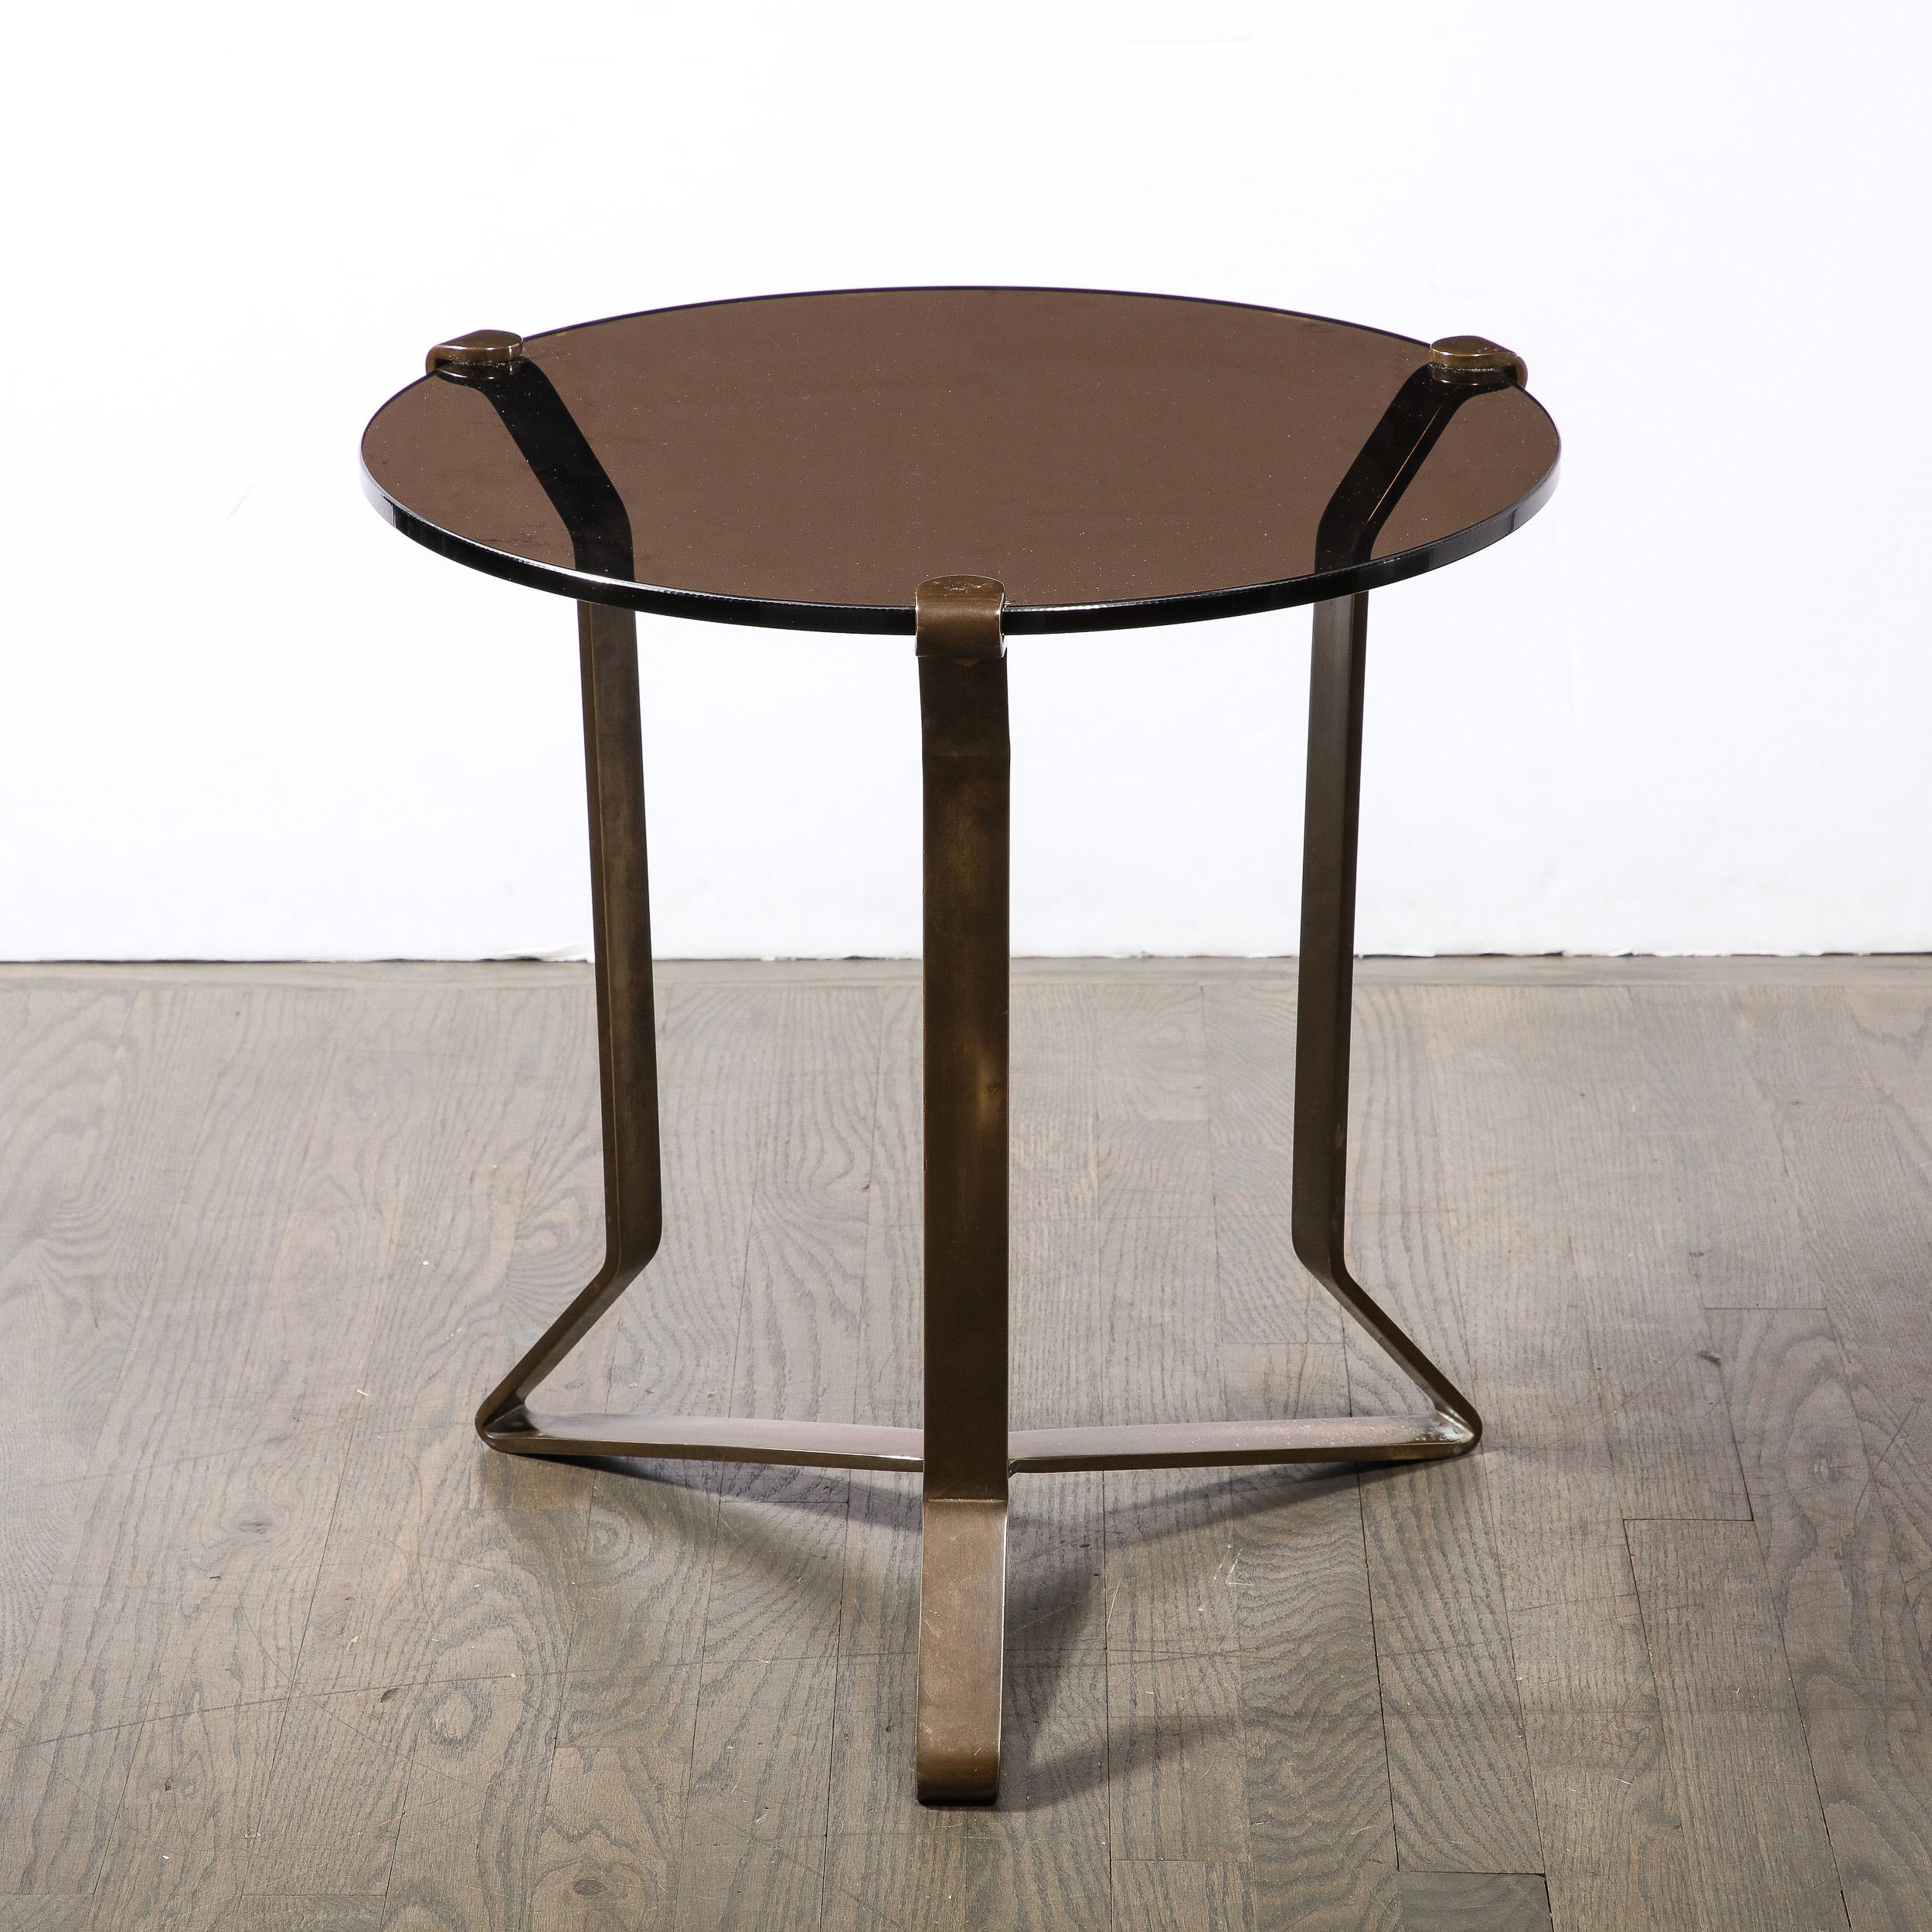 This dynamic yet reserved Mid-Century Modernist Bronze and Smoked Glass Side / Occasional Table originates from the United States, Circa 1950. Features supports and base composed of a minimal framework in oil rubbed bronze, elegantly formed and